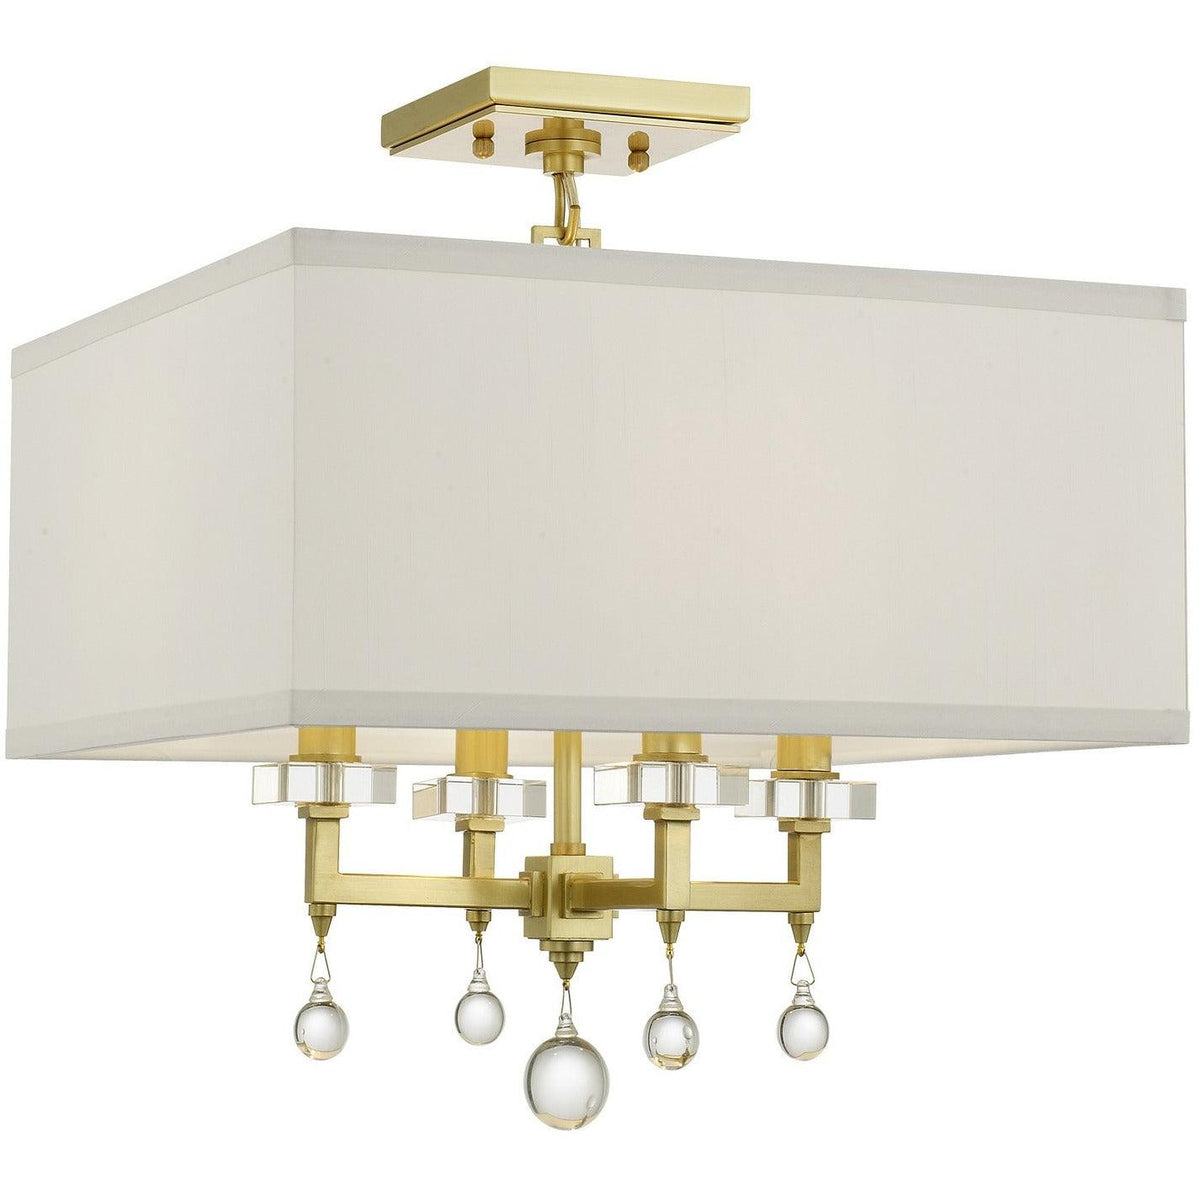 Crystorama - Paxton Four Light Ceiling Mount - 8105-AG_CEILING | Montreal Lighting & Hardware